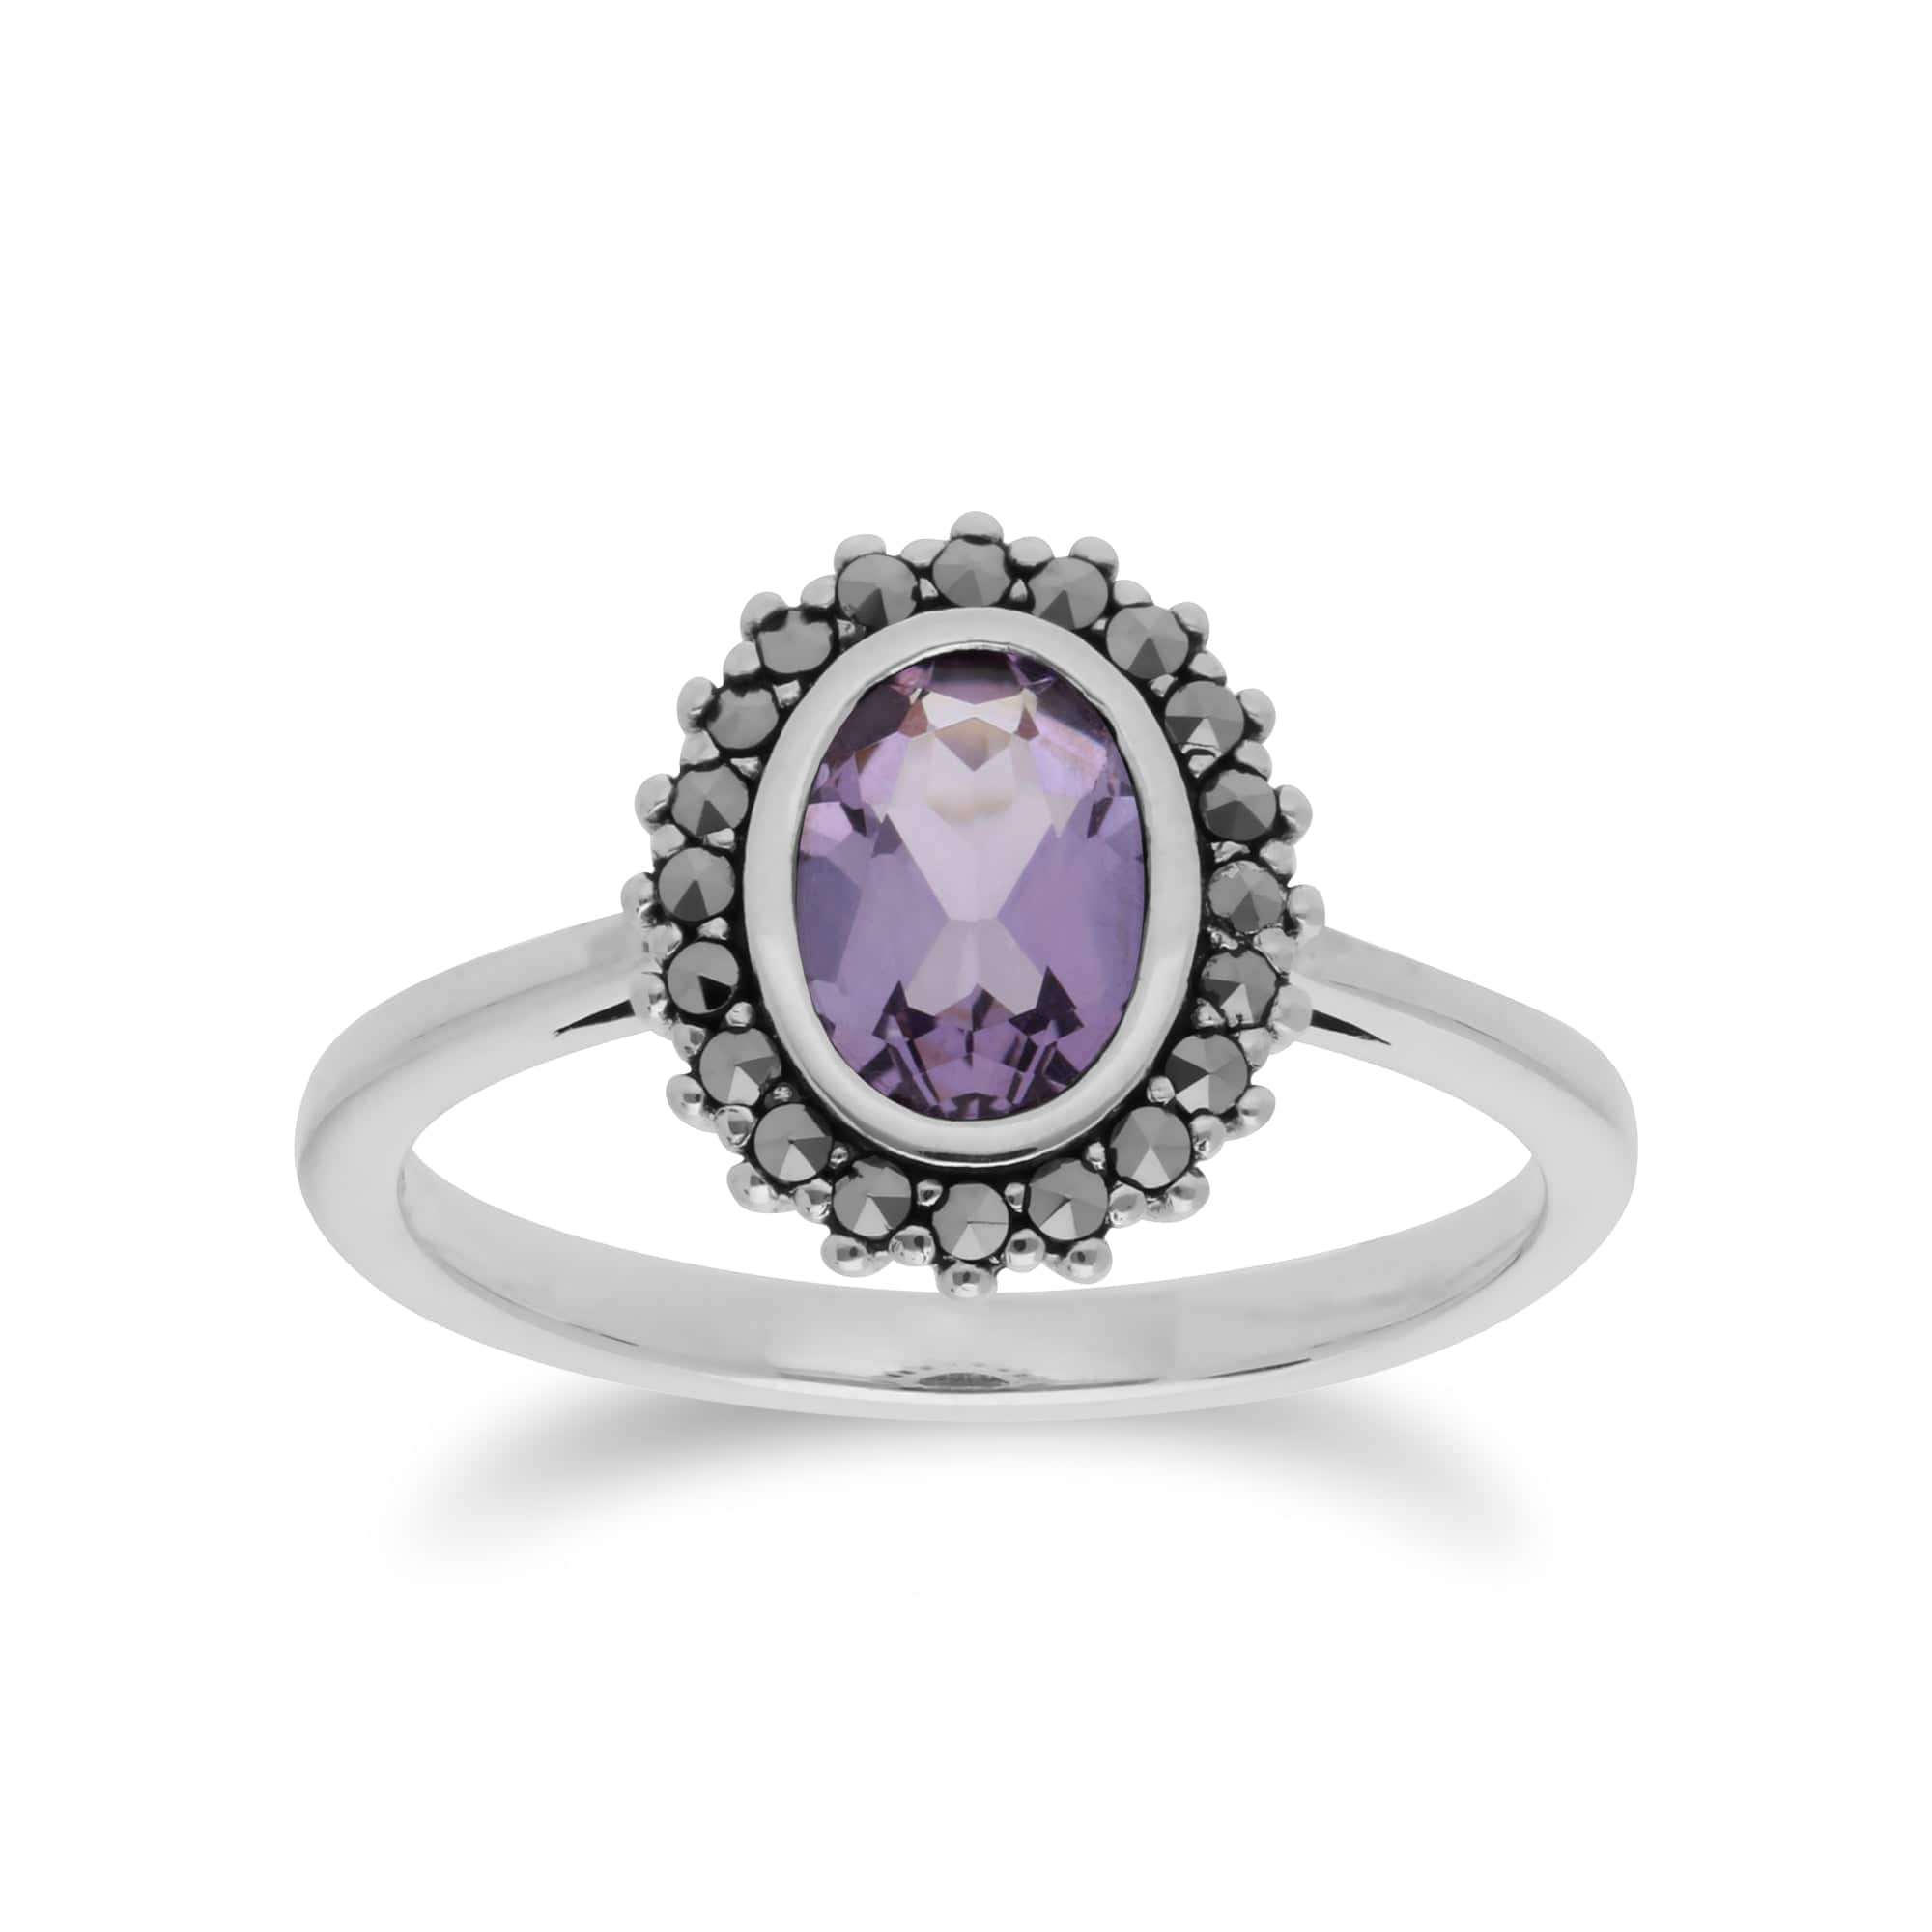 Art Deco Style Oval Amethyst & Marcasite Halo Ring in 925 Sterling Silver - Gemondo